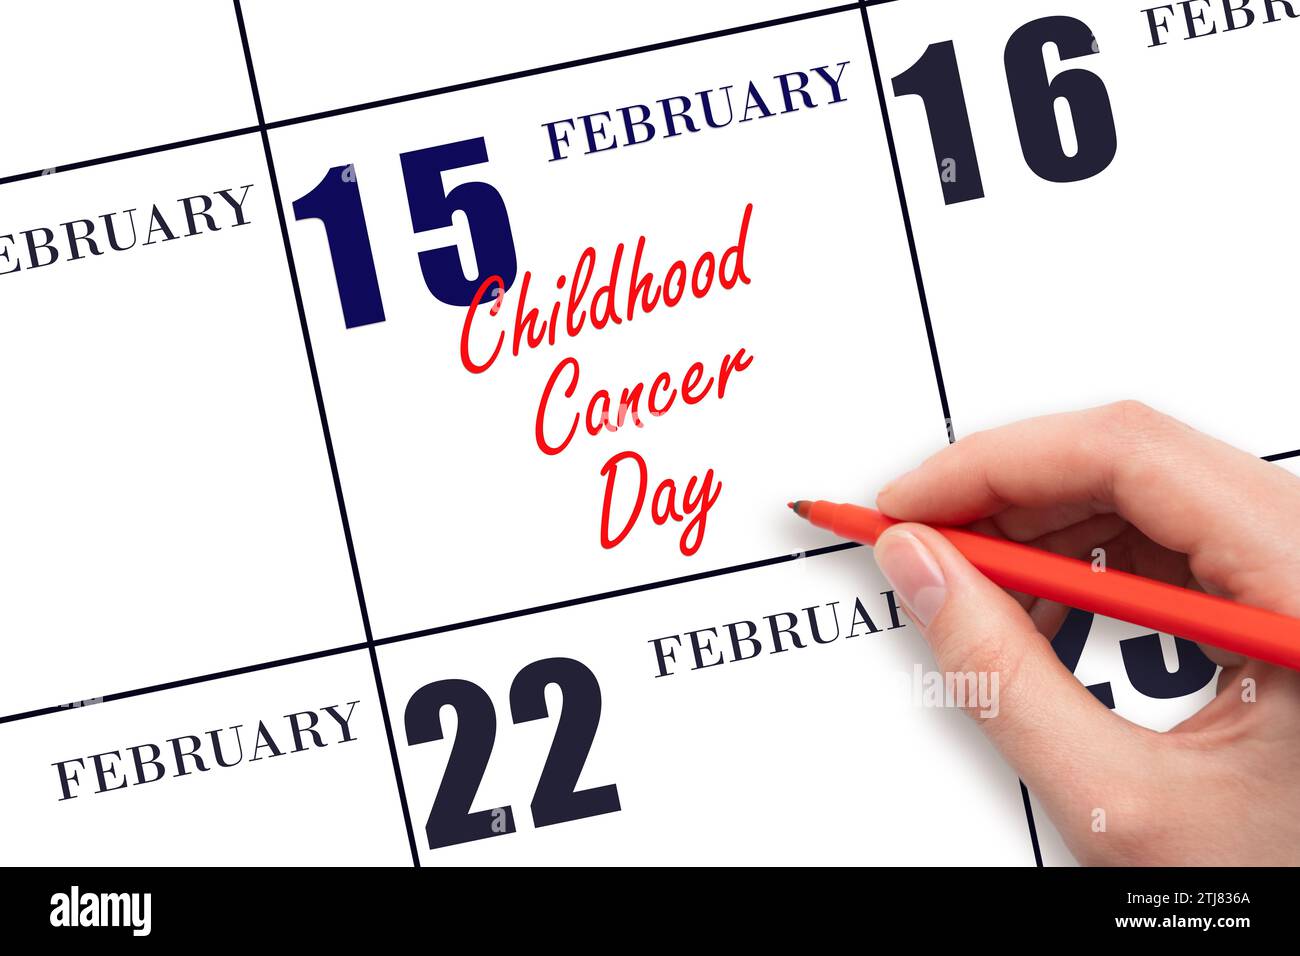 February 15. Hand writing text Childhood Cancer Day on calendar date. Save the date. Holiday. Day of the year concept. Stock Photo